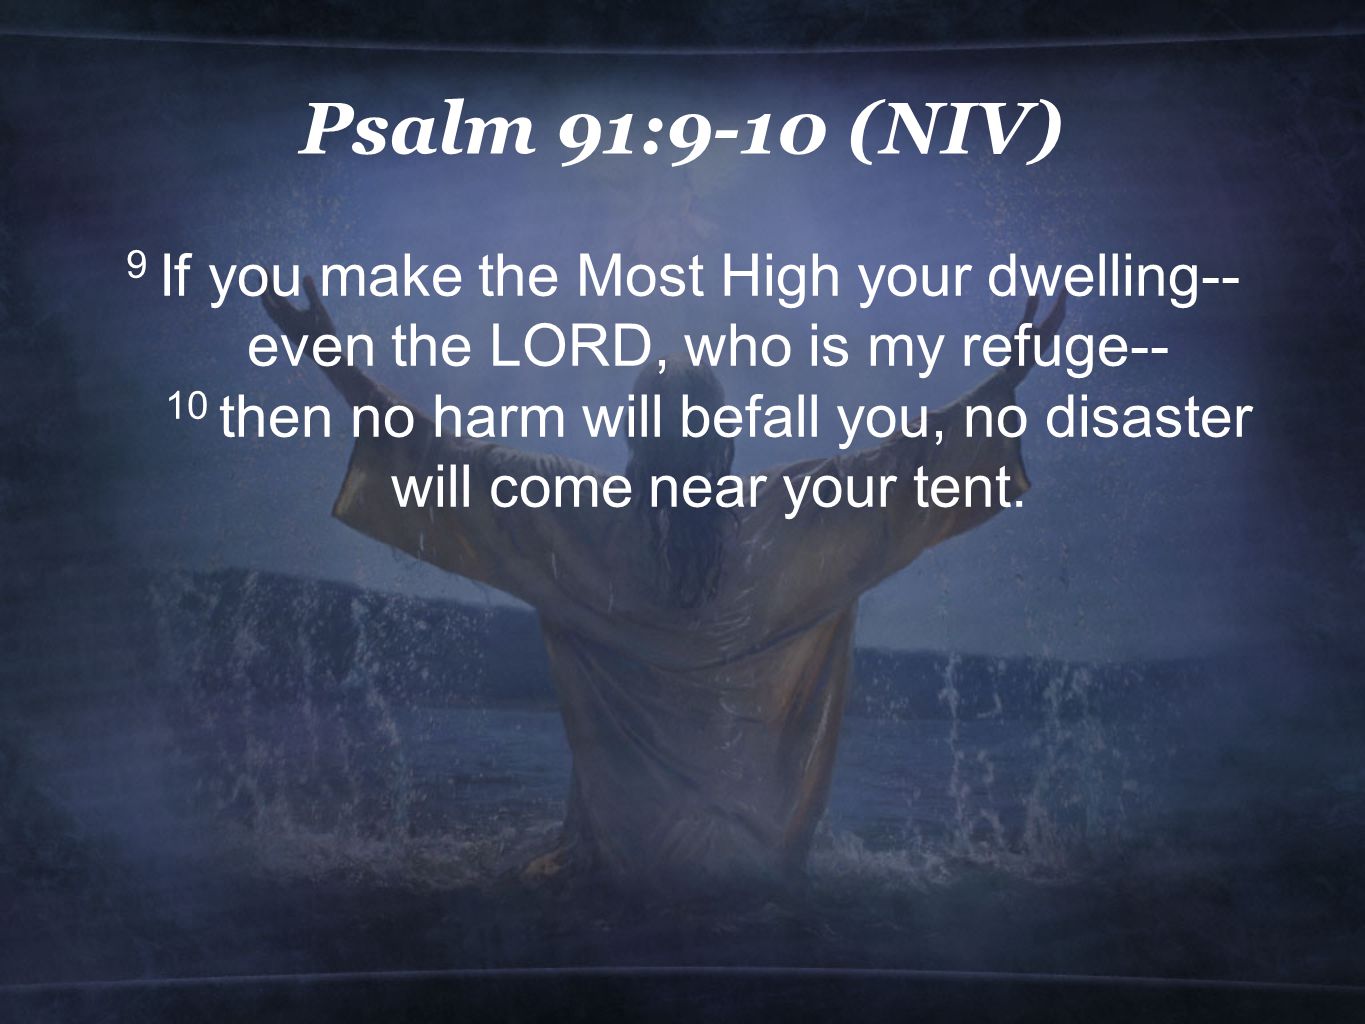 Psalm 91:9-10 (NIV) 9 If you make the Most High your dwelling-- even the LORD, who is my refuge-- 10 then no harm will befall you, no disaster will come near your tent.